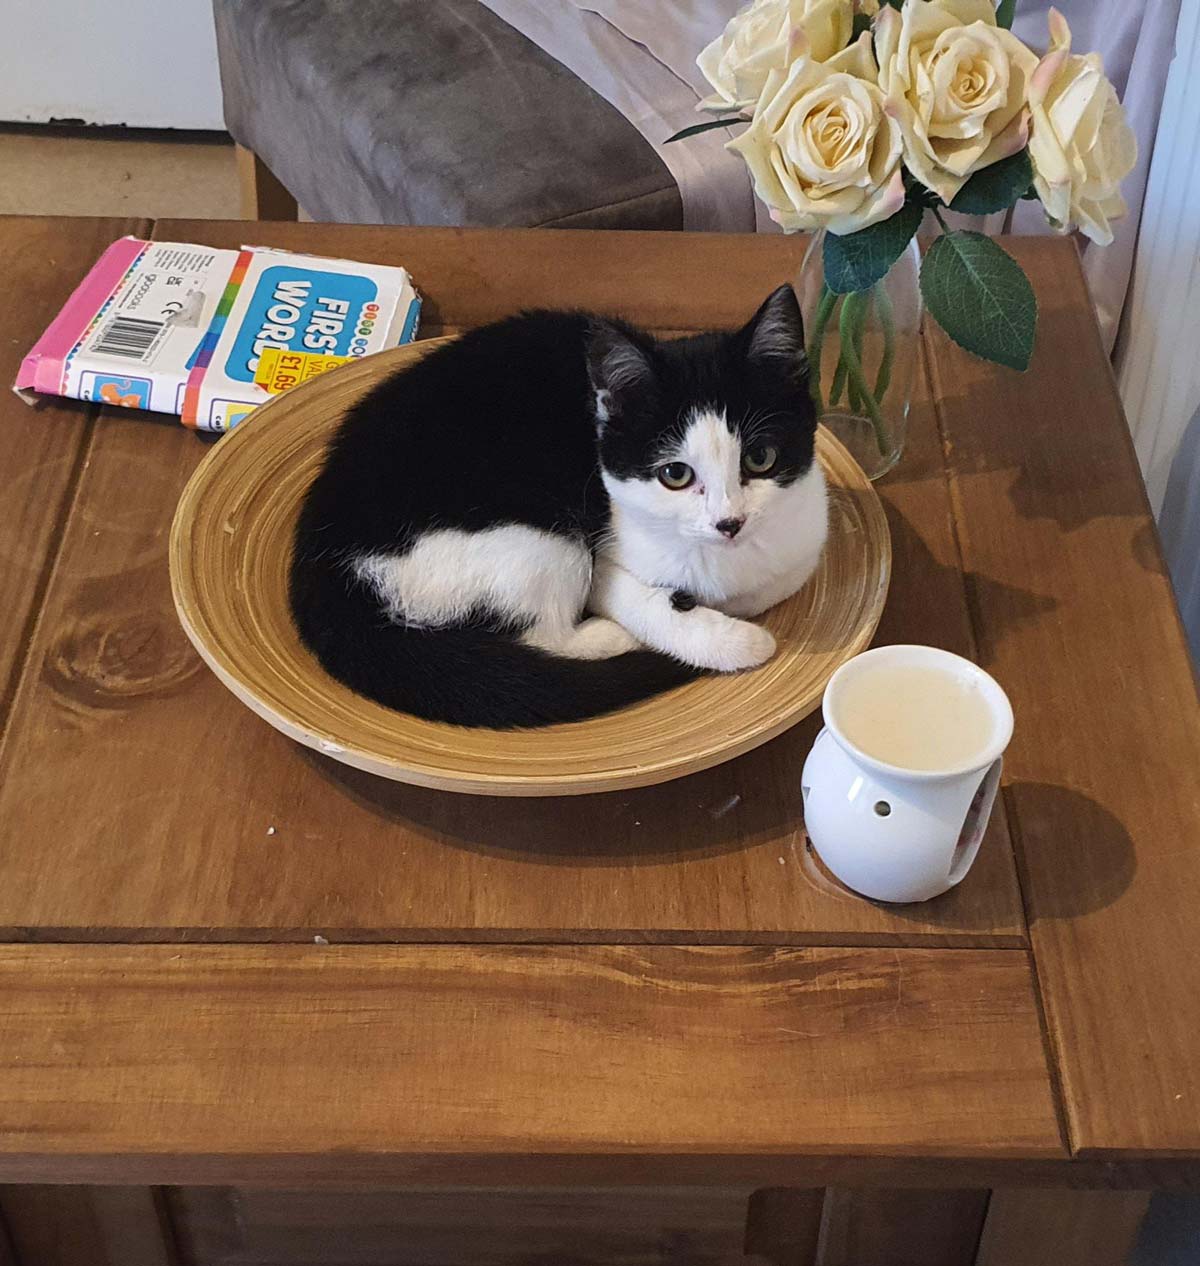 I bought a new cat bowl today...